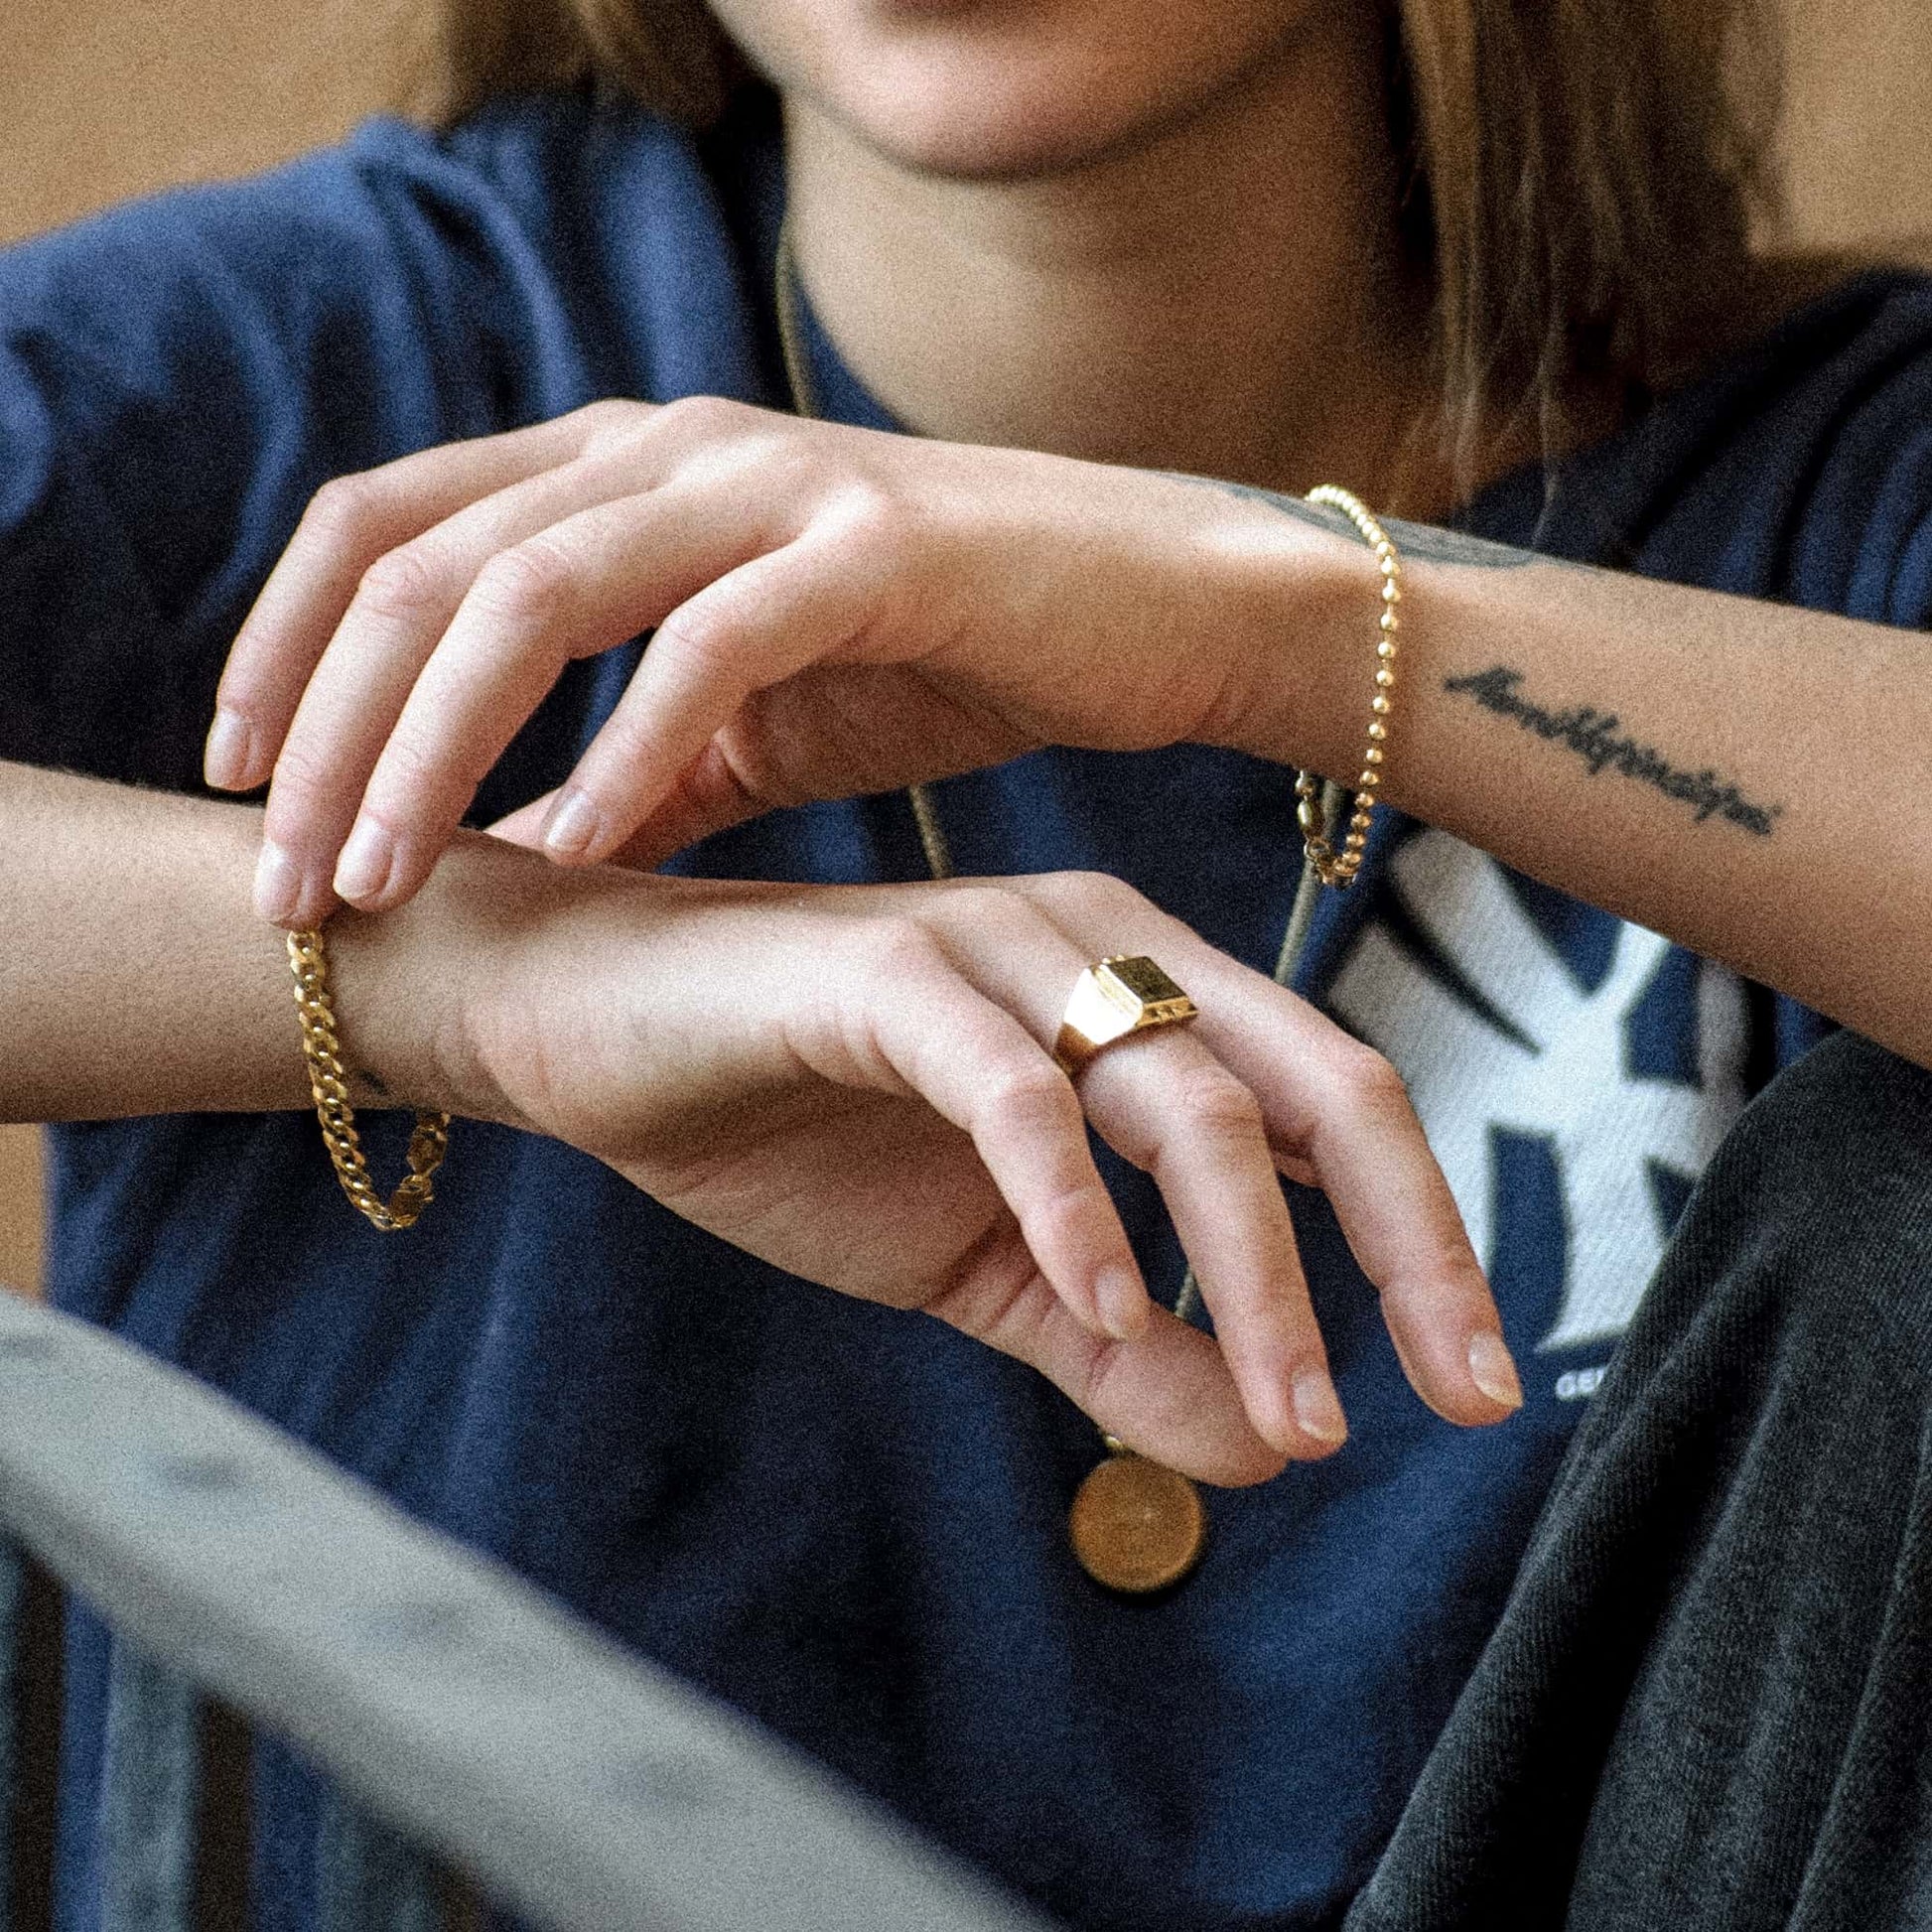 The Cuban bracelet is made of 925 sterling silver, covered with 18K gold. The bracelet is handcrafted in Italy and made for both men and women.